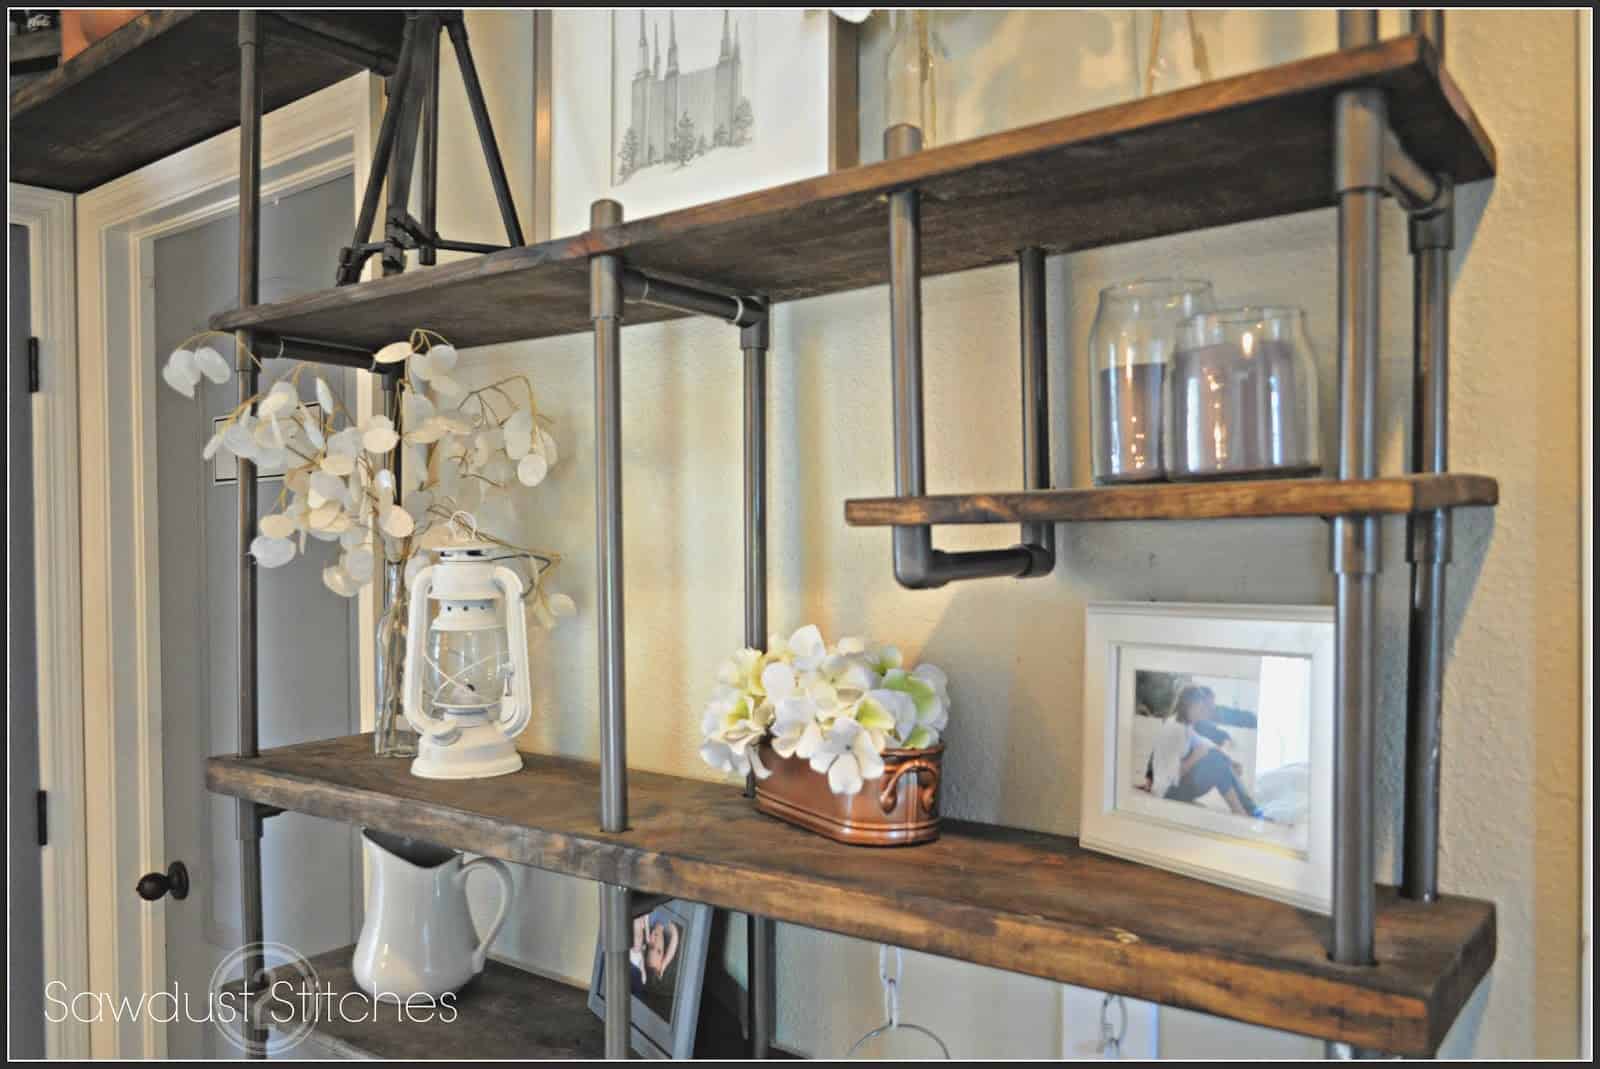 use PVC pipe to build an inexpensive industrial style shelf Sawdust 2 Stitches on Remodelaholic